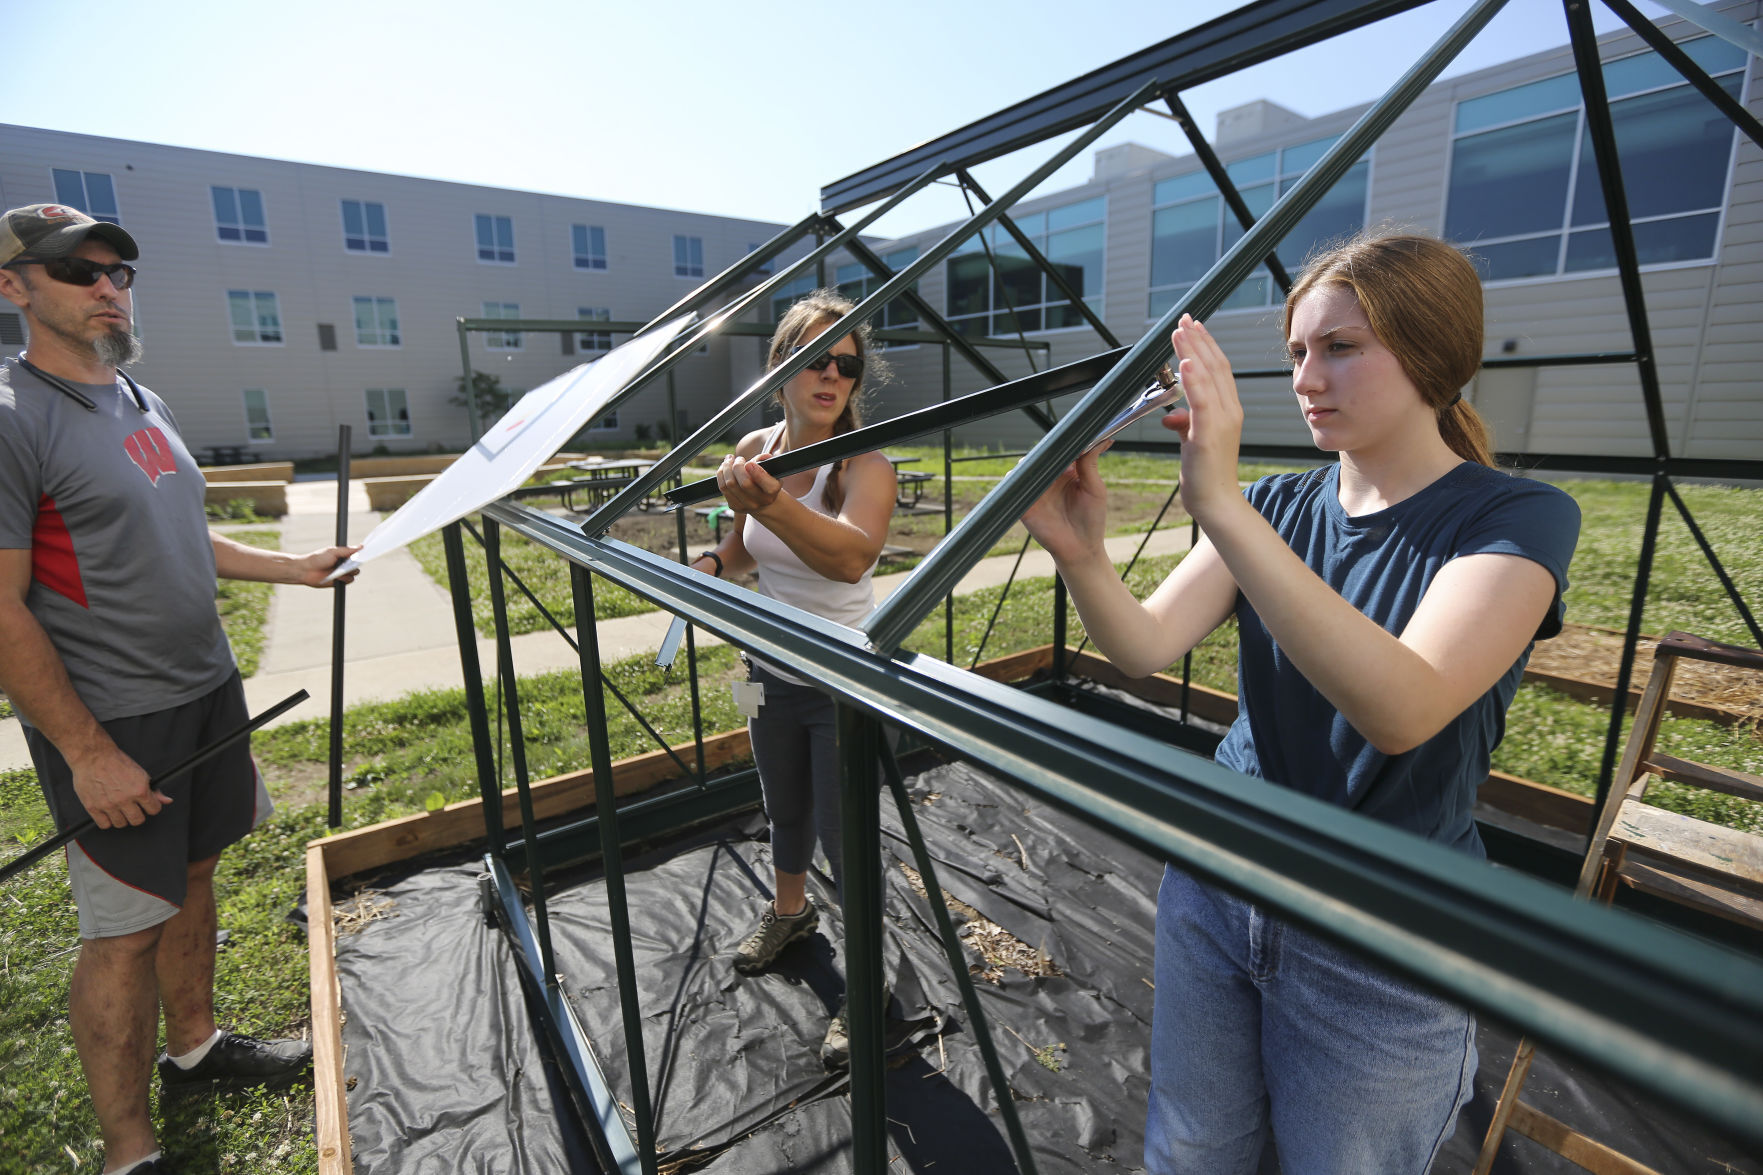 Wahlert Catholic High School junior Megan Hefel (right), 16, helps construct a greenhouse last week with instructor Korrin Schriver and Schriver’s husband, Sean.    PHOTO CREDIT: Dave Kettering